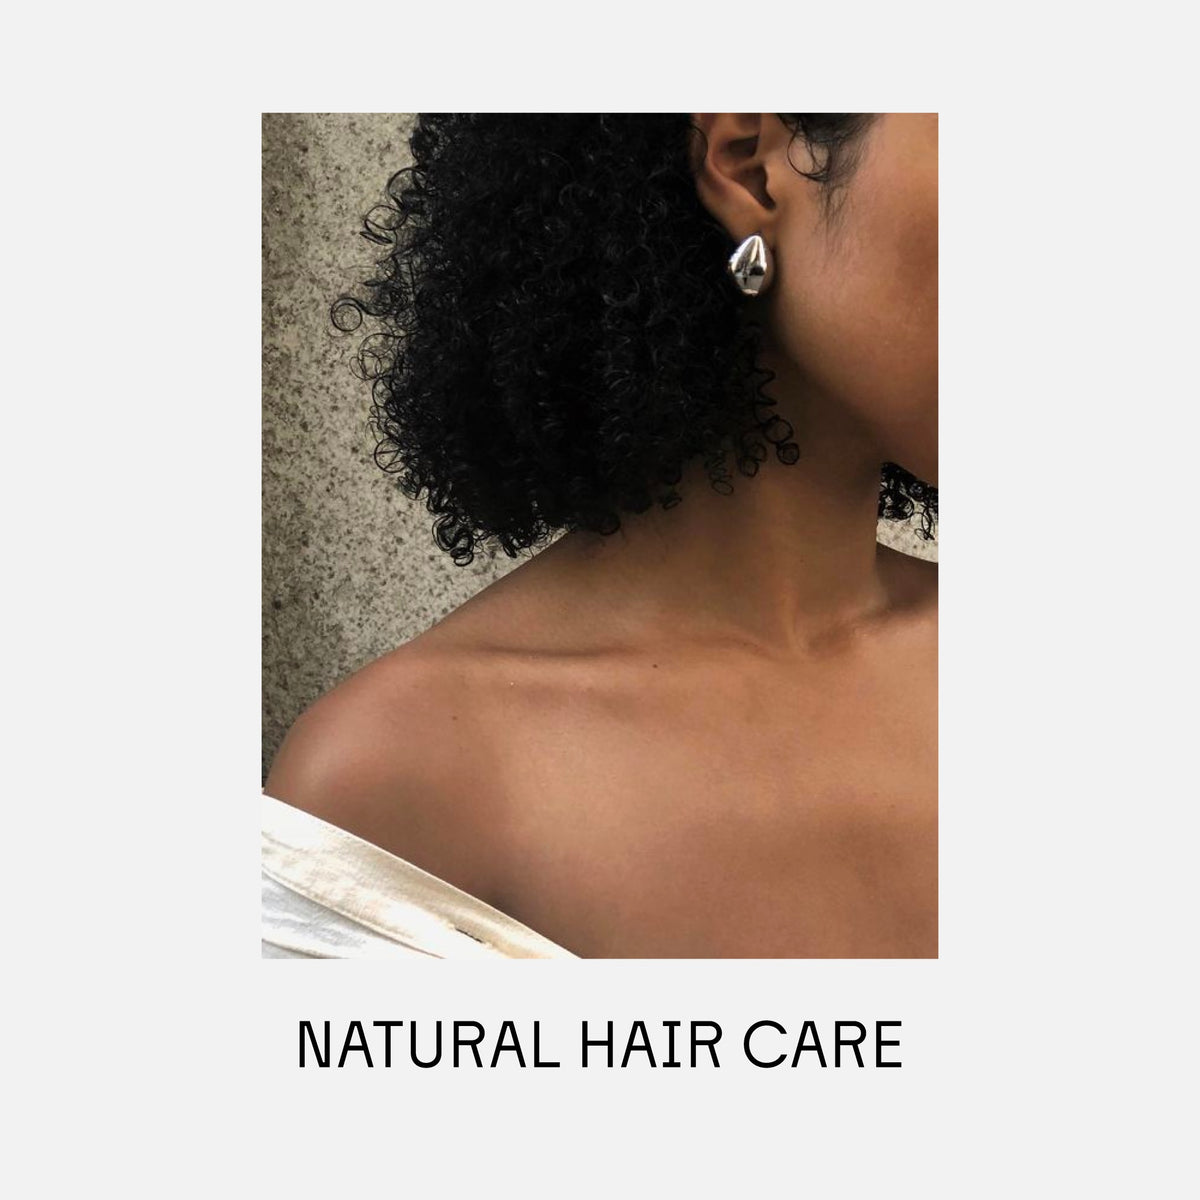 What To Expect With Natural Hair Care